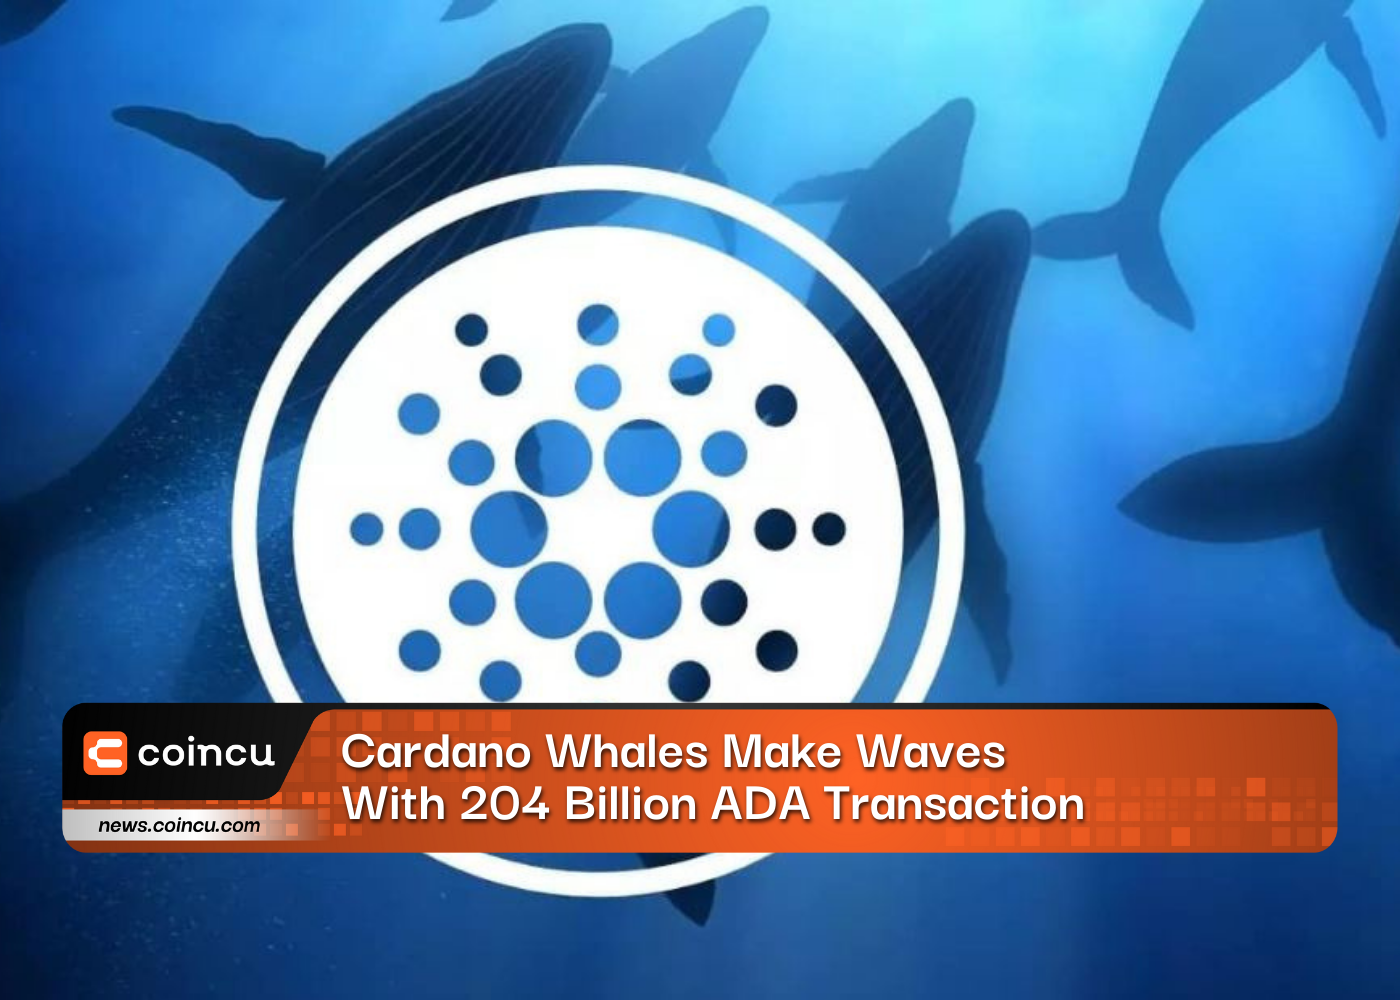 Cardano Whales Make Waves